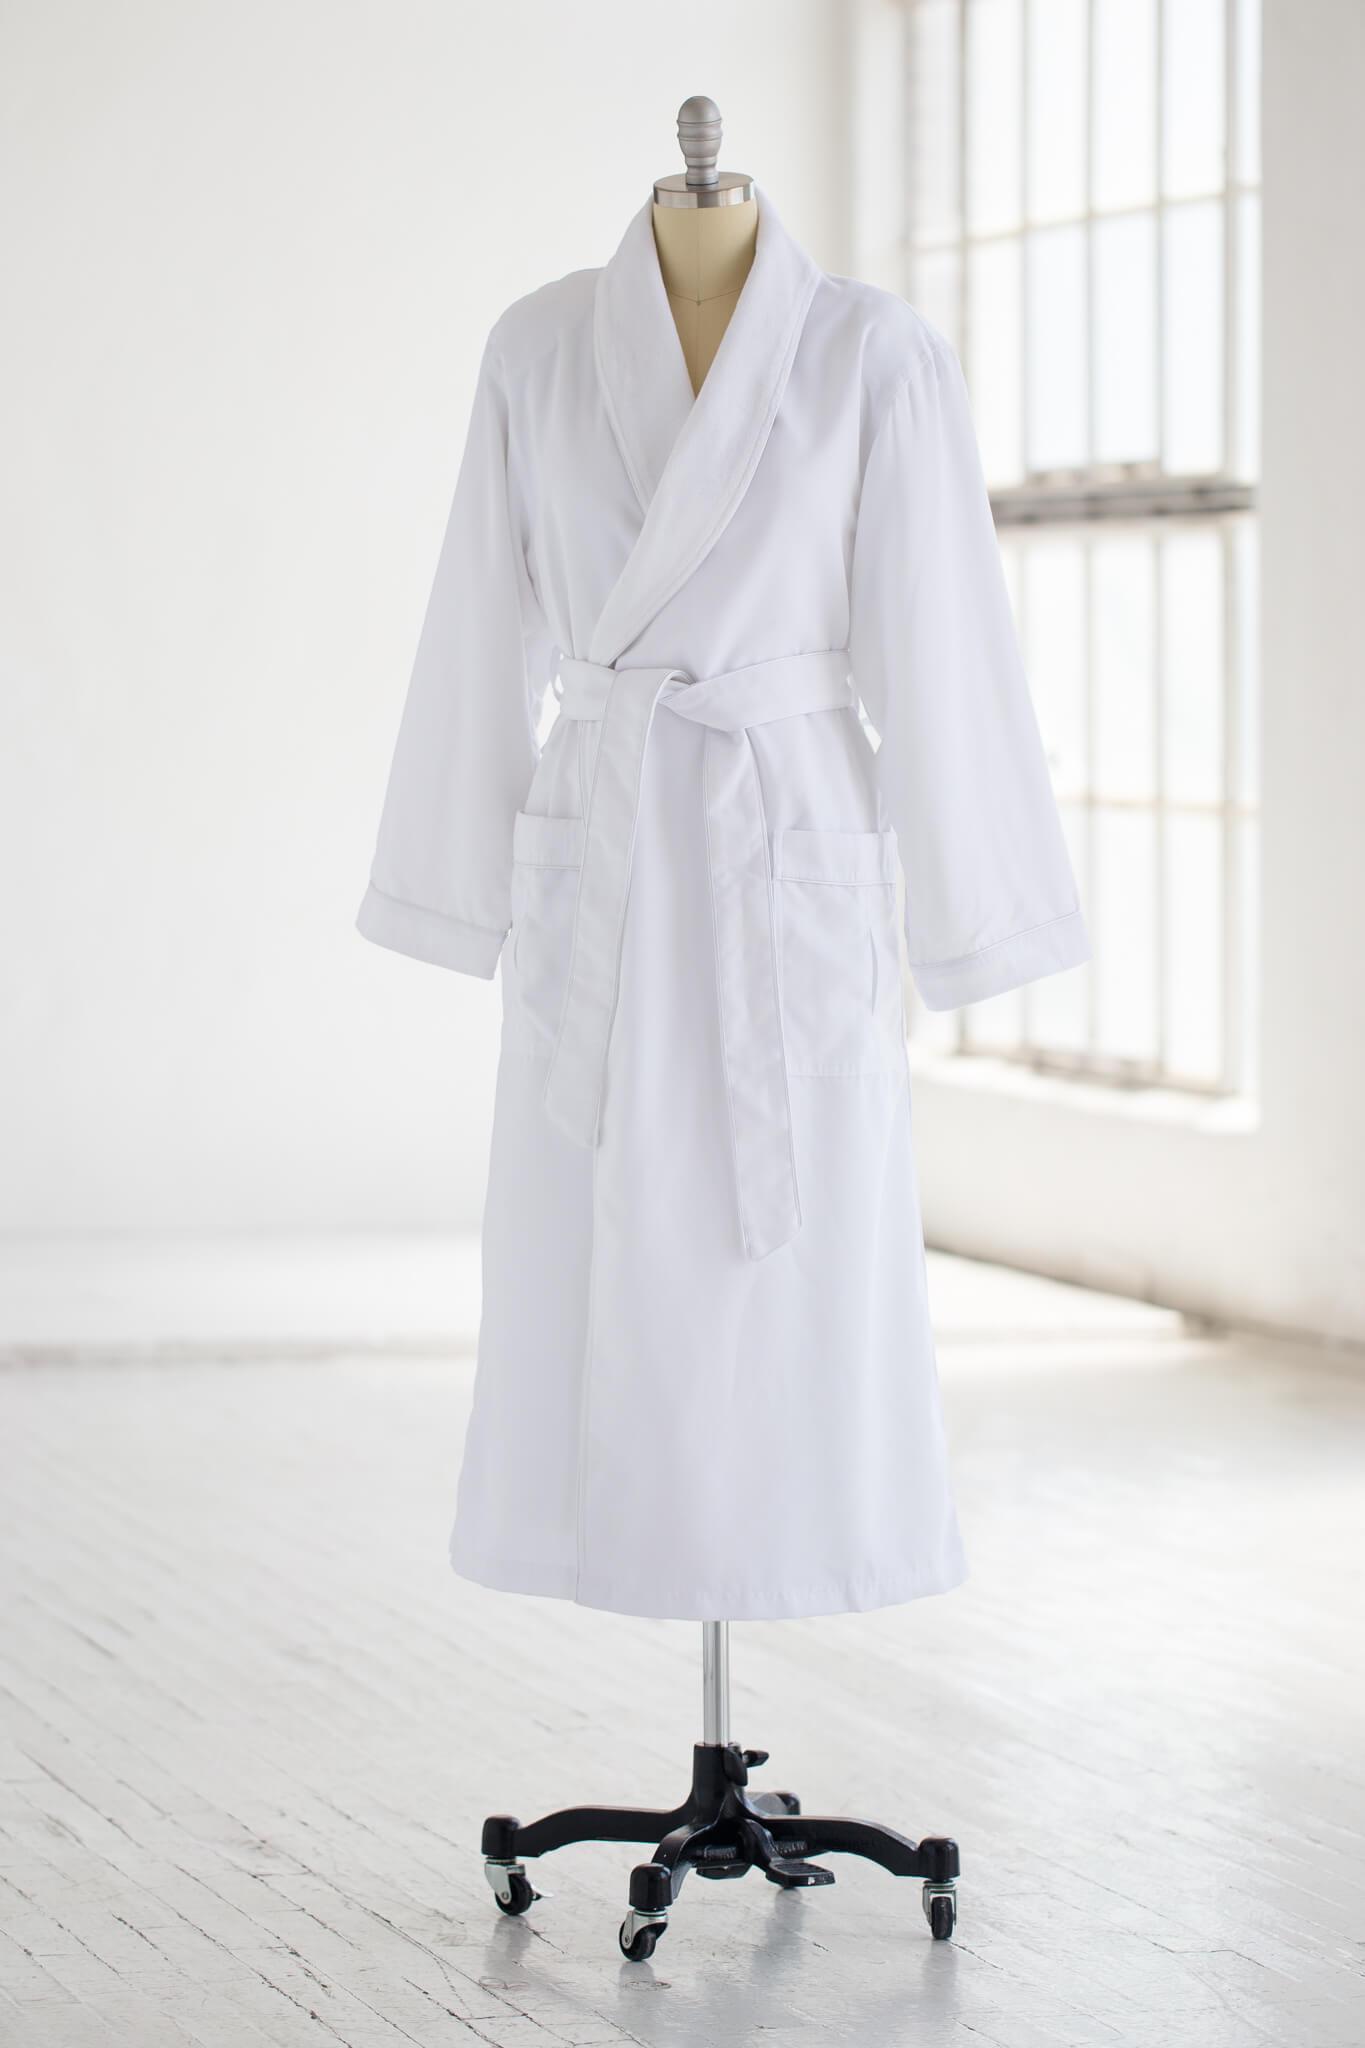 Classic Terry Cloth Spa Robe, Luxury Spa Robes